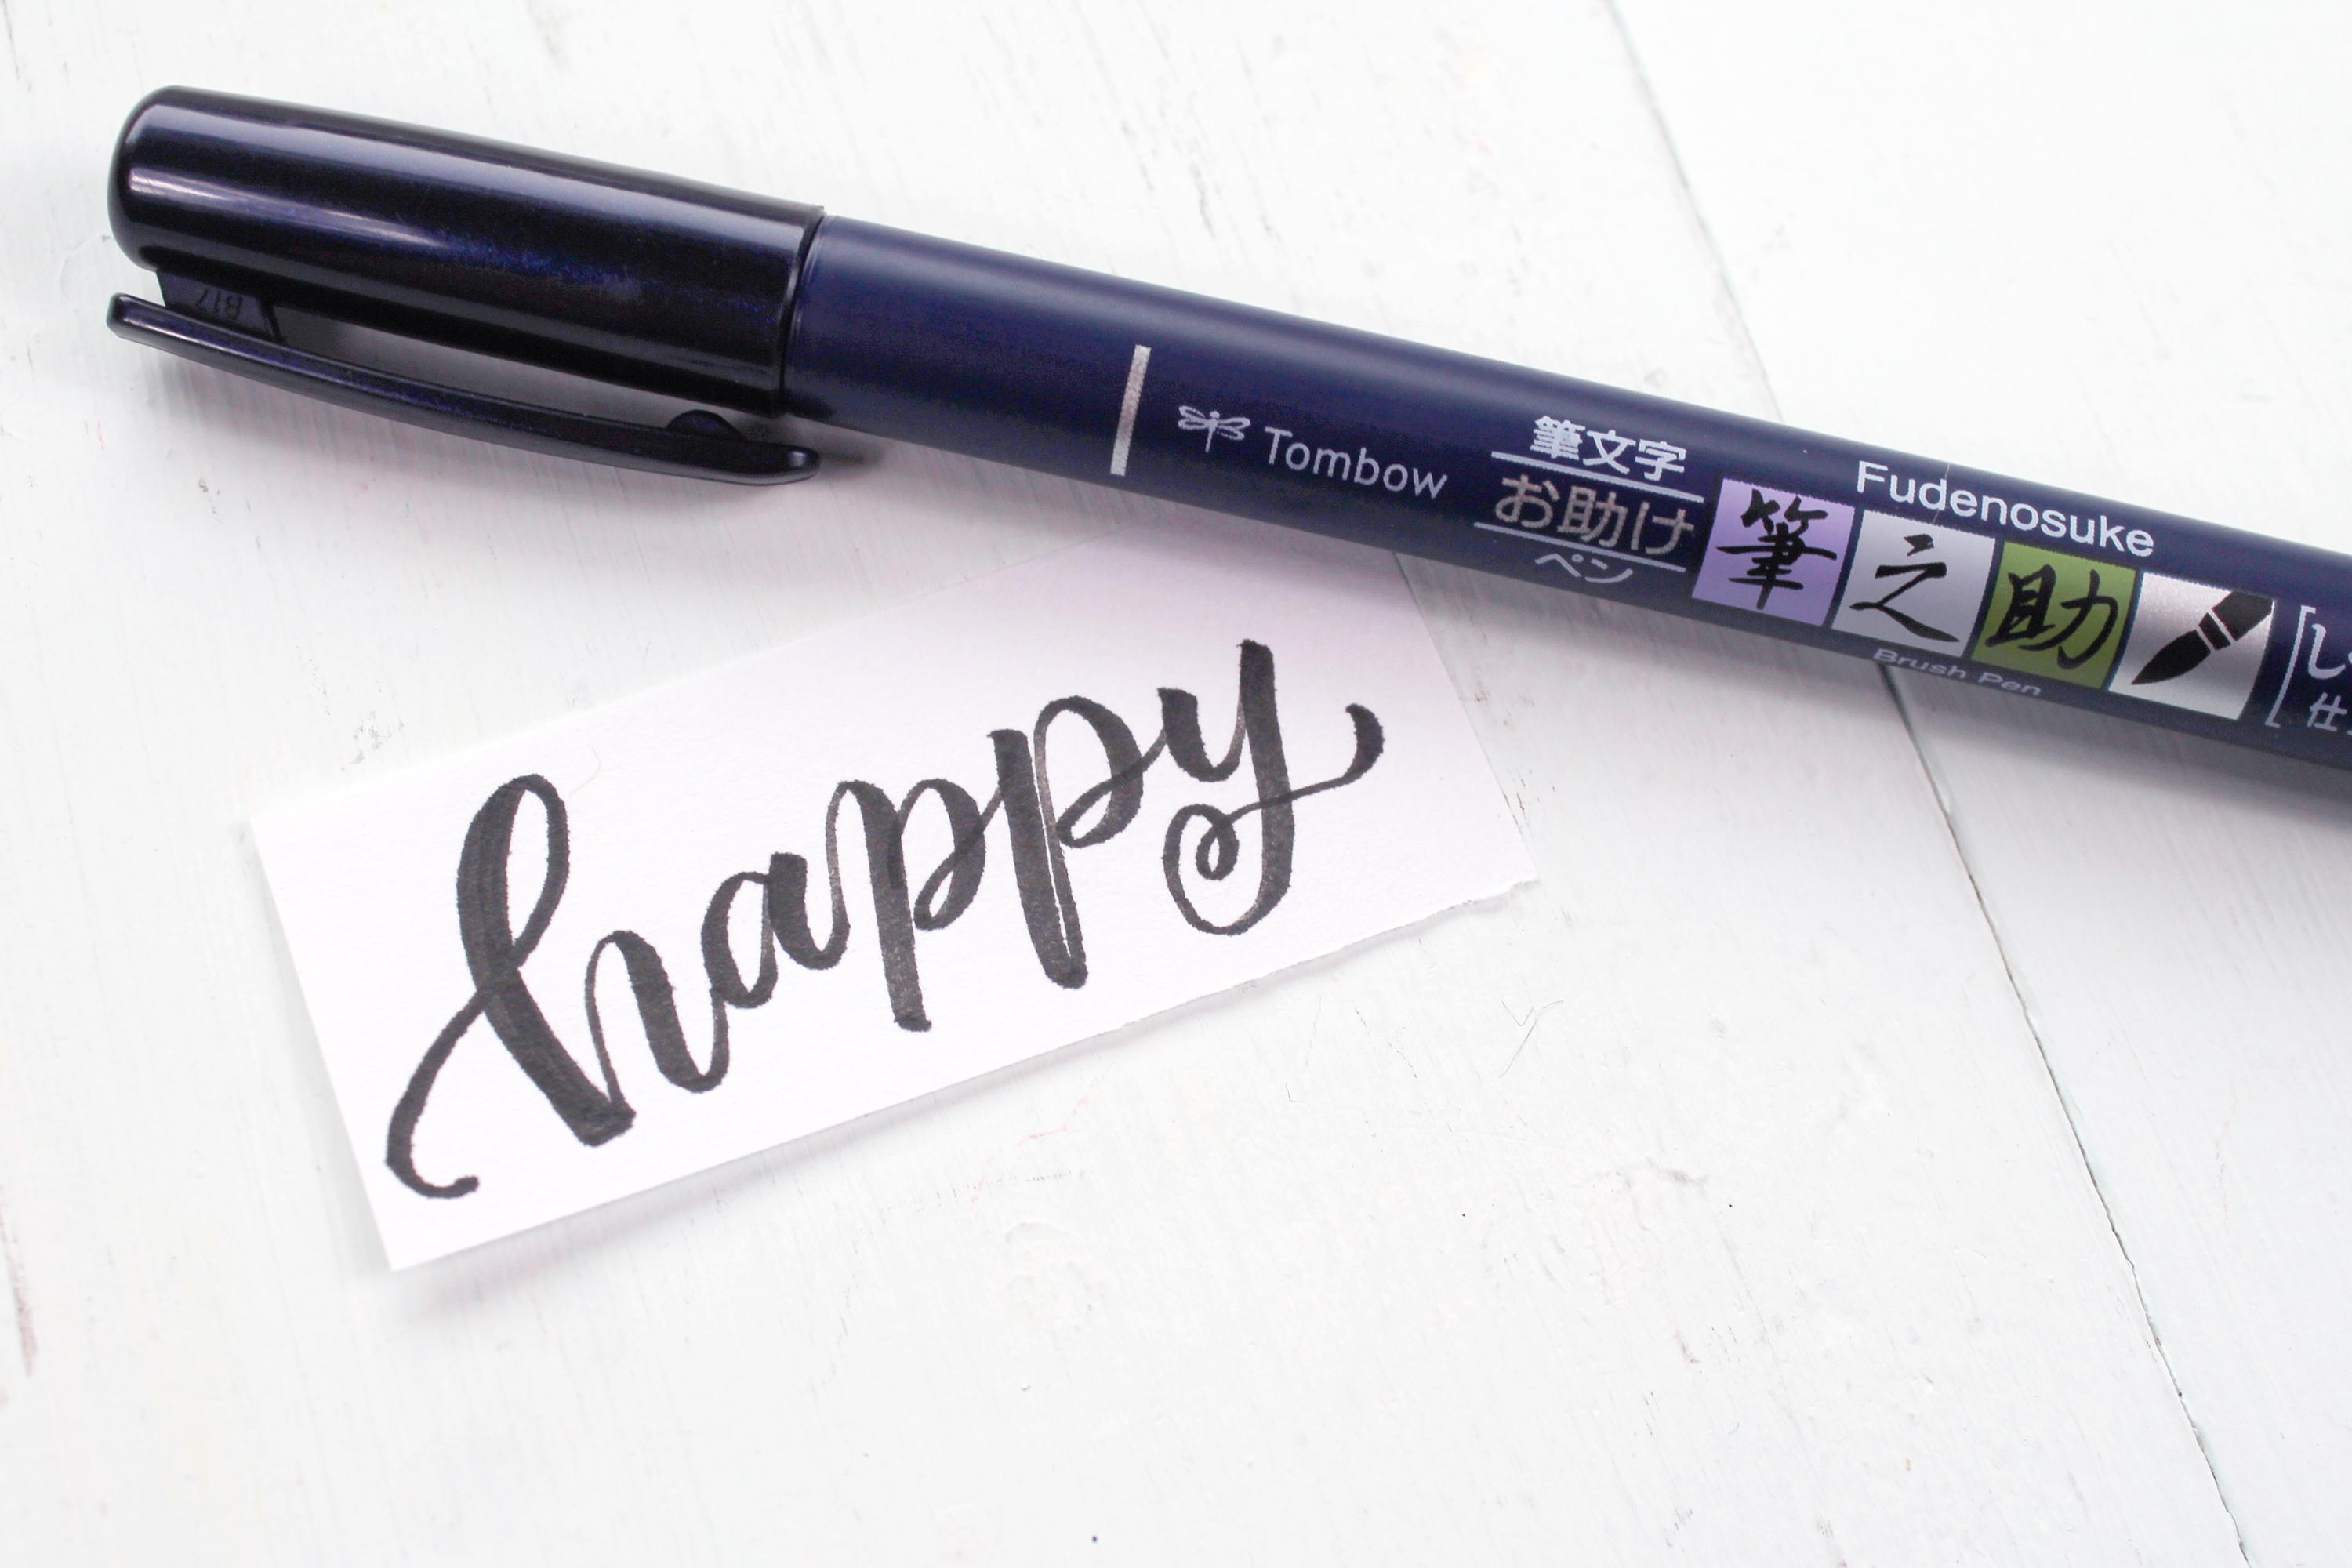 Write the word for a carved stamp with the Tombow Fudenosuke Pen on paper.